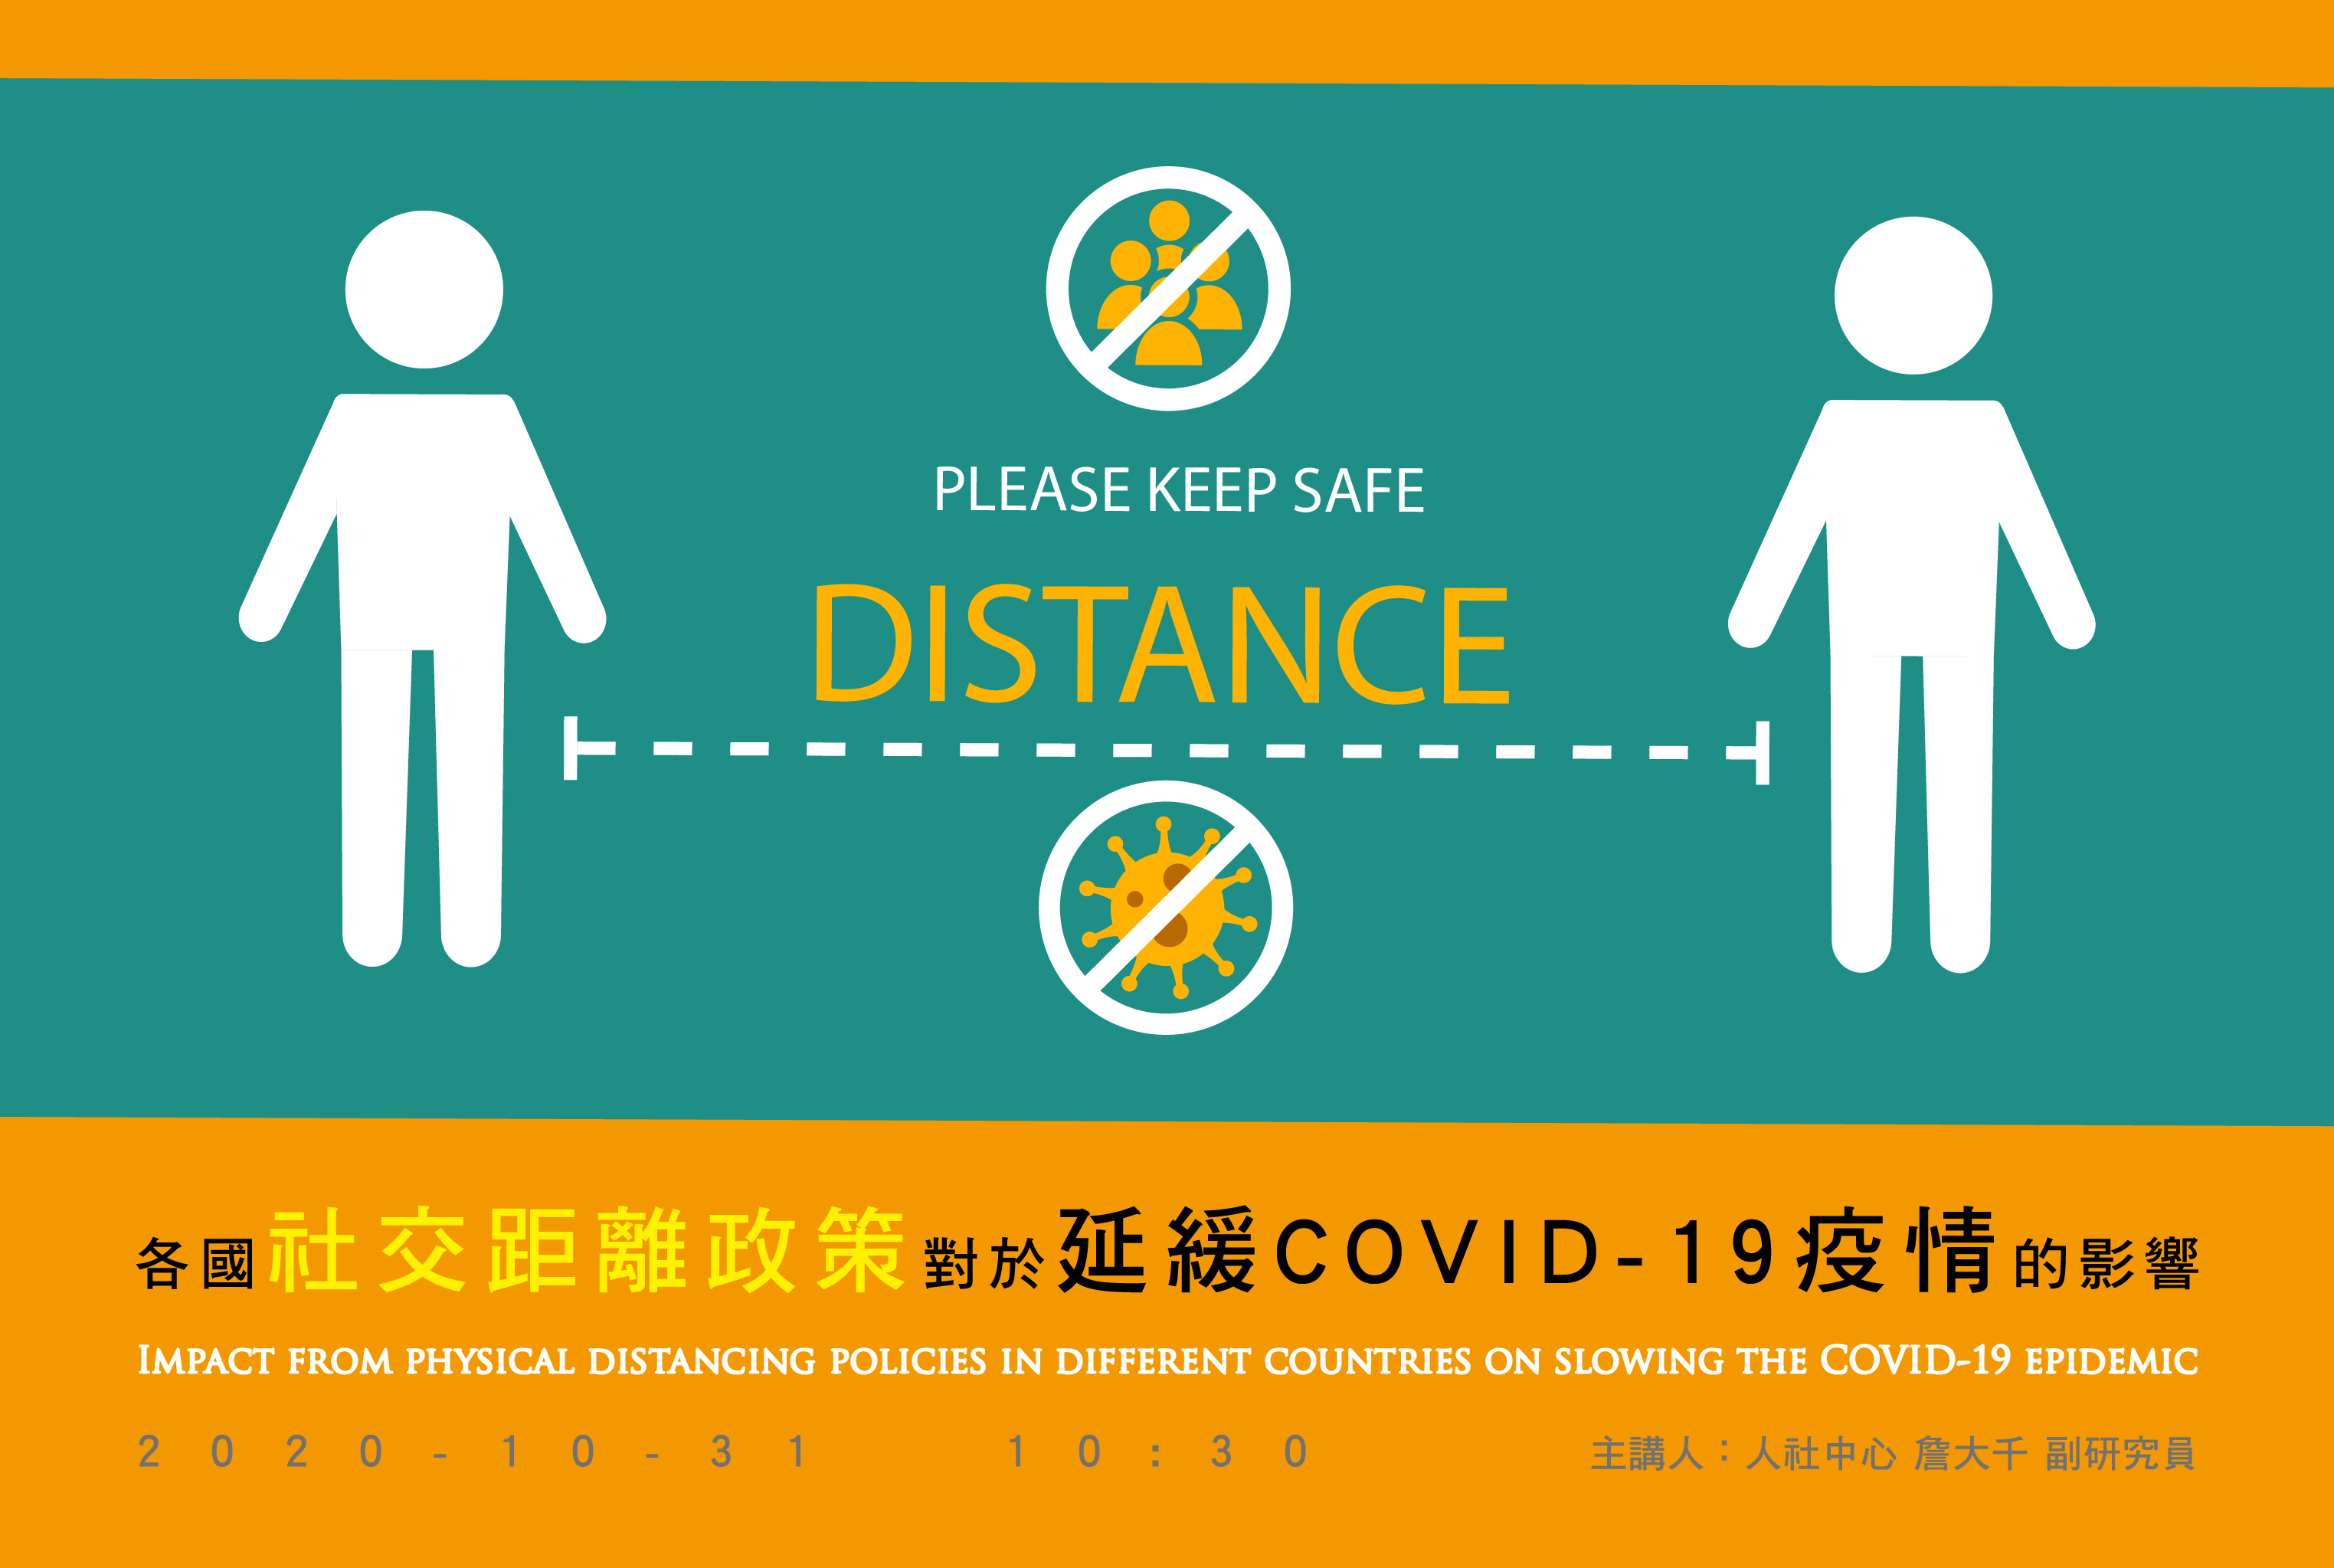 Online- Impact from physical distancing policies in different countries on slowing the COVID-19 epidemic